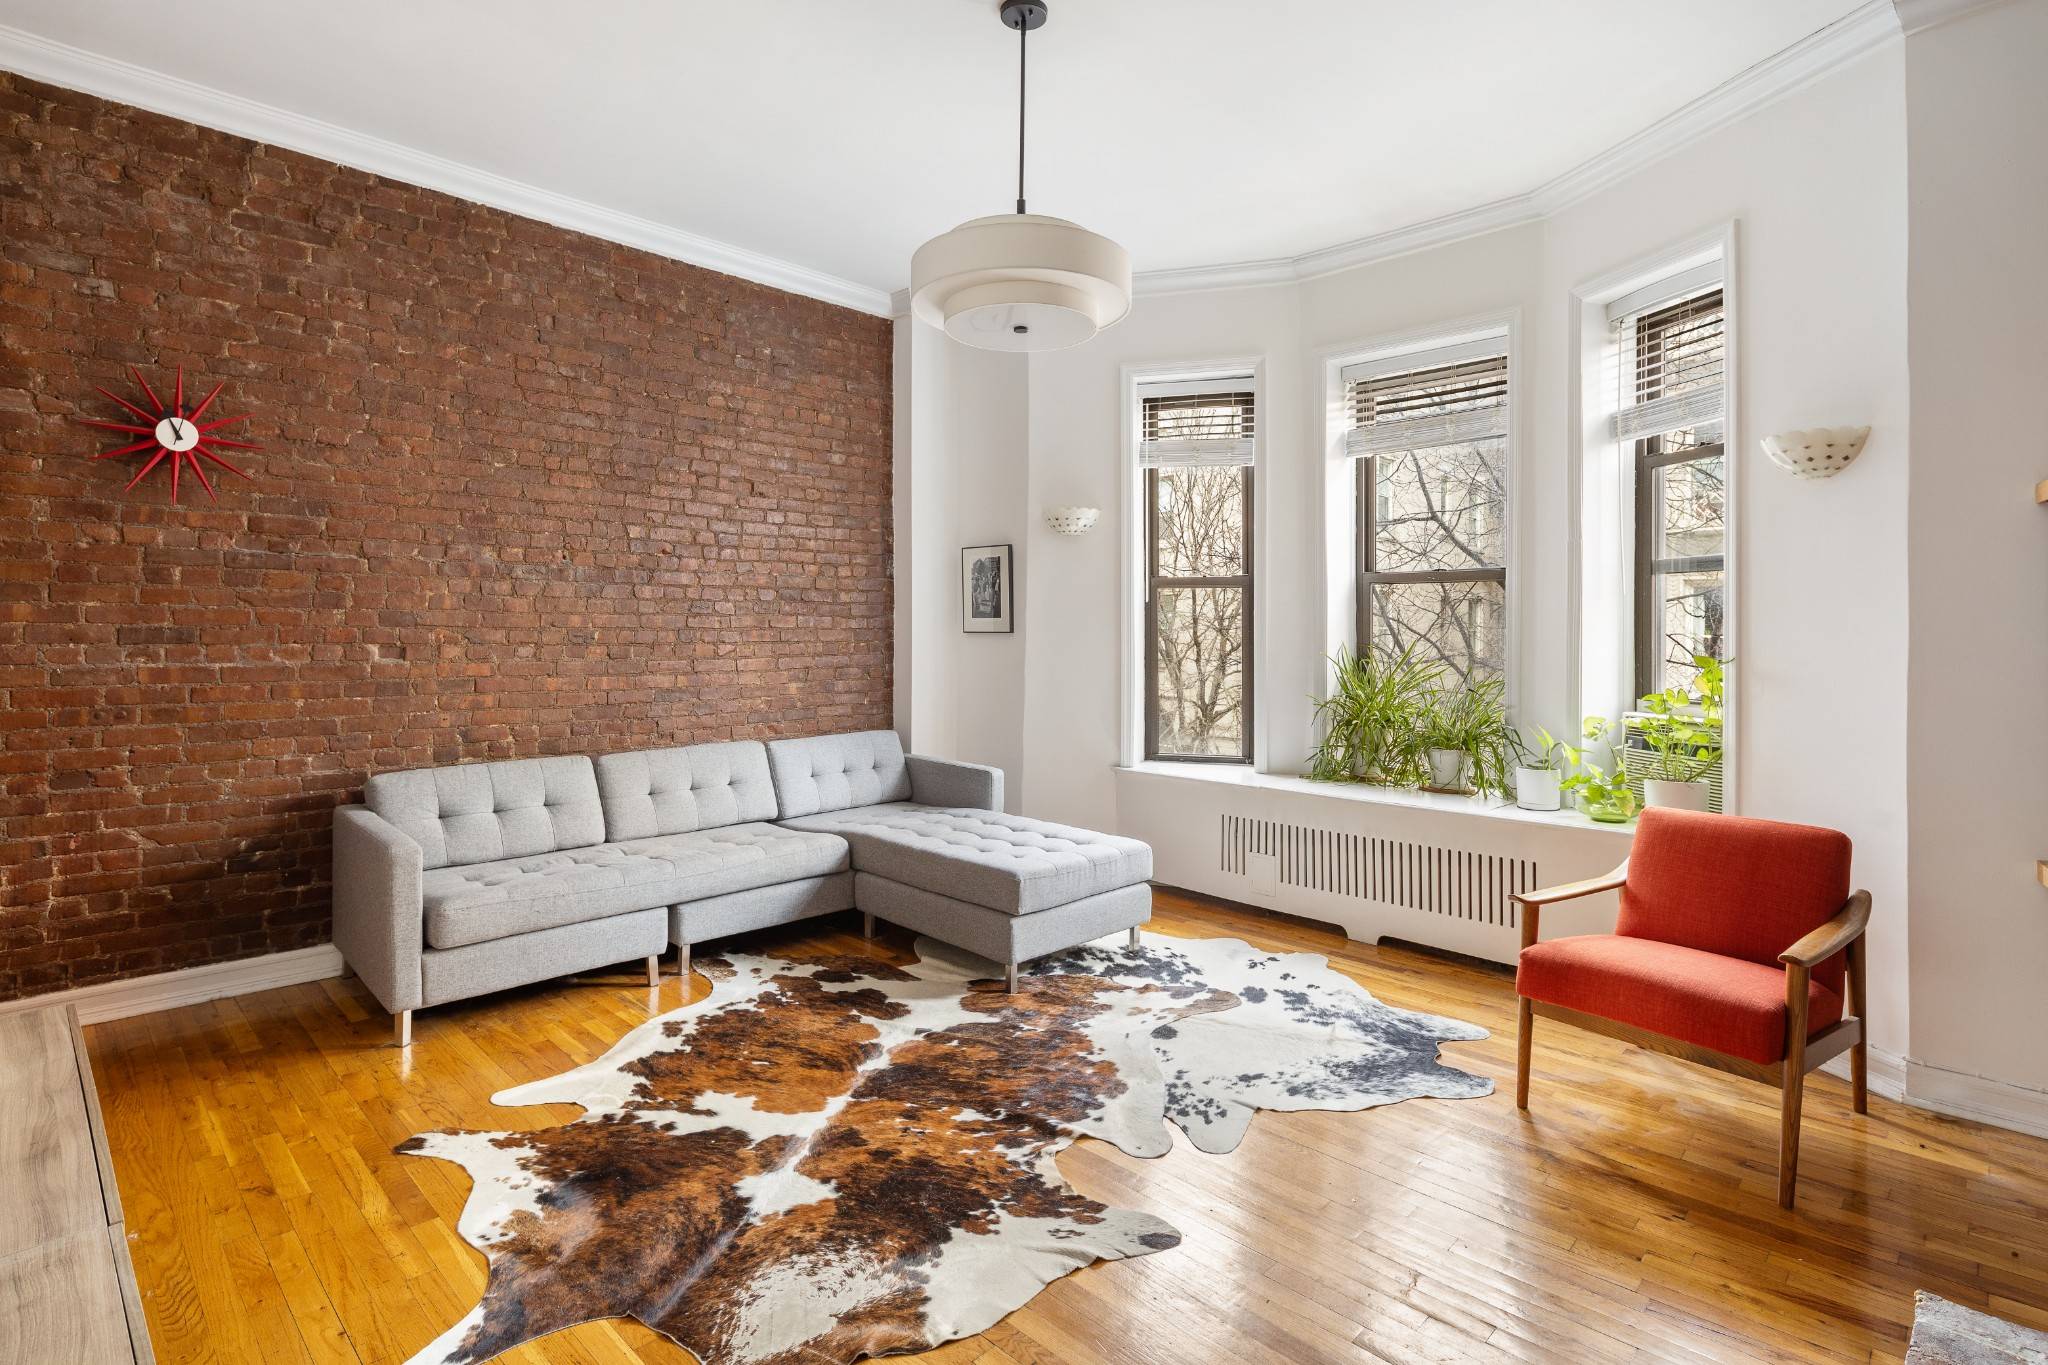 Welcome to this one of a kind 1 bedroom apartment in the heart of the Upper West Side.